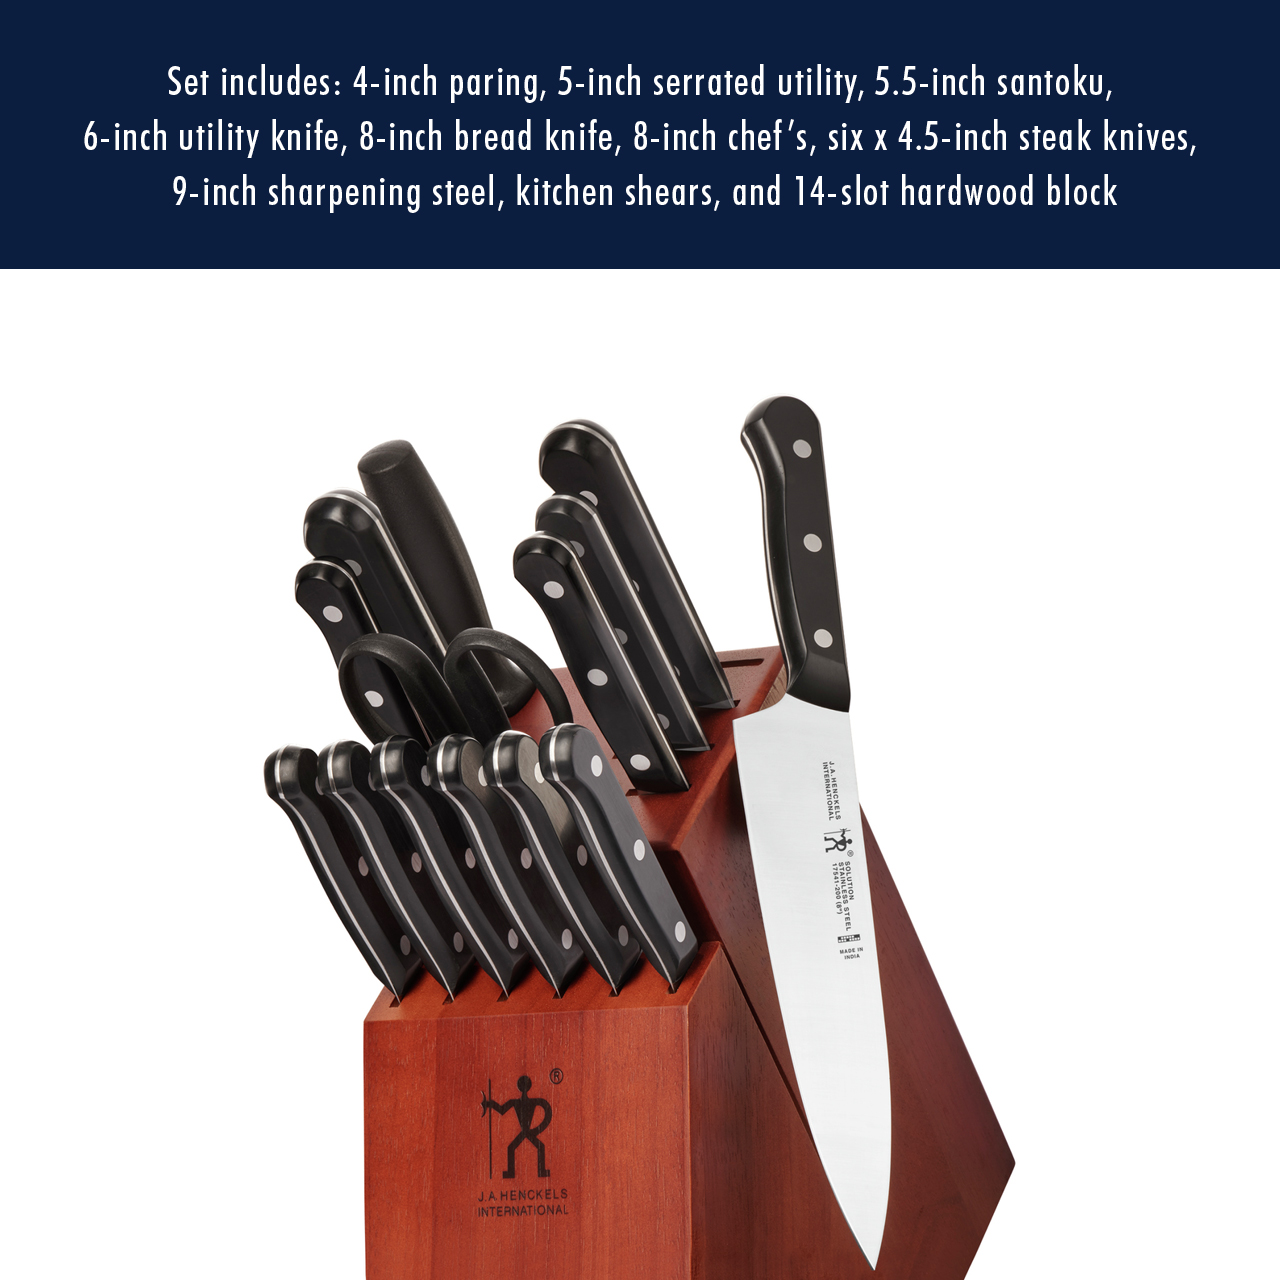 Henckels Solution 15-pc Kitchen Knife Set with Block, Chef Knife, Paring Knife, Utility Knife, Bread Knife, Steak Knife, Black, Stainless Steel - image 7 of 9